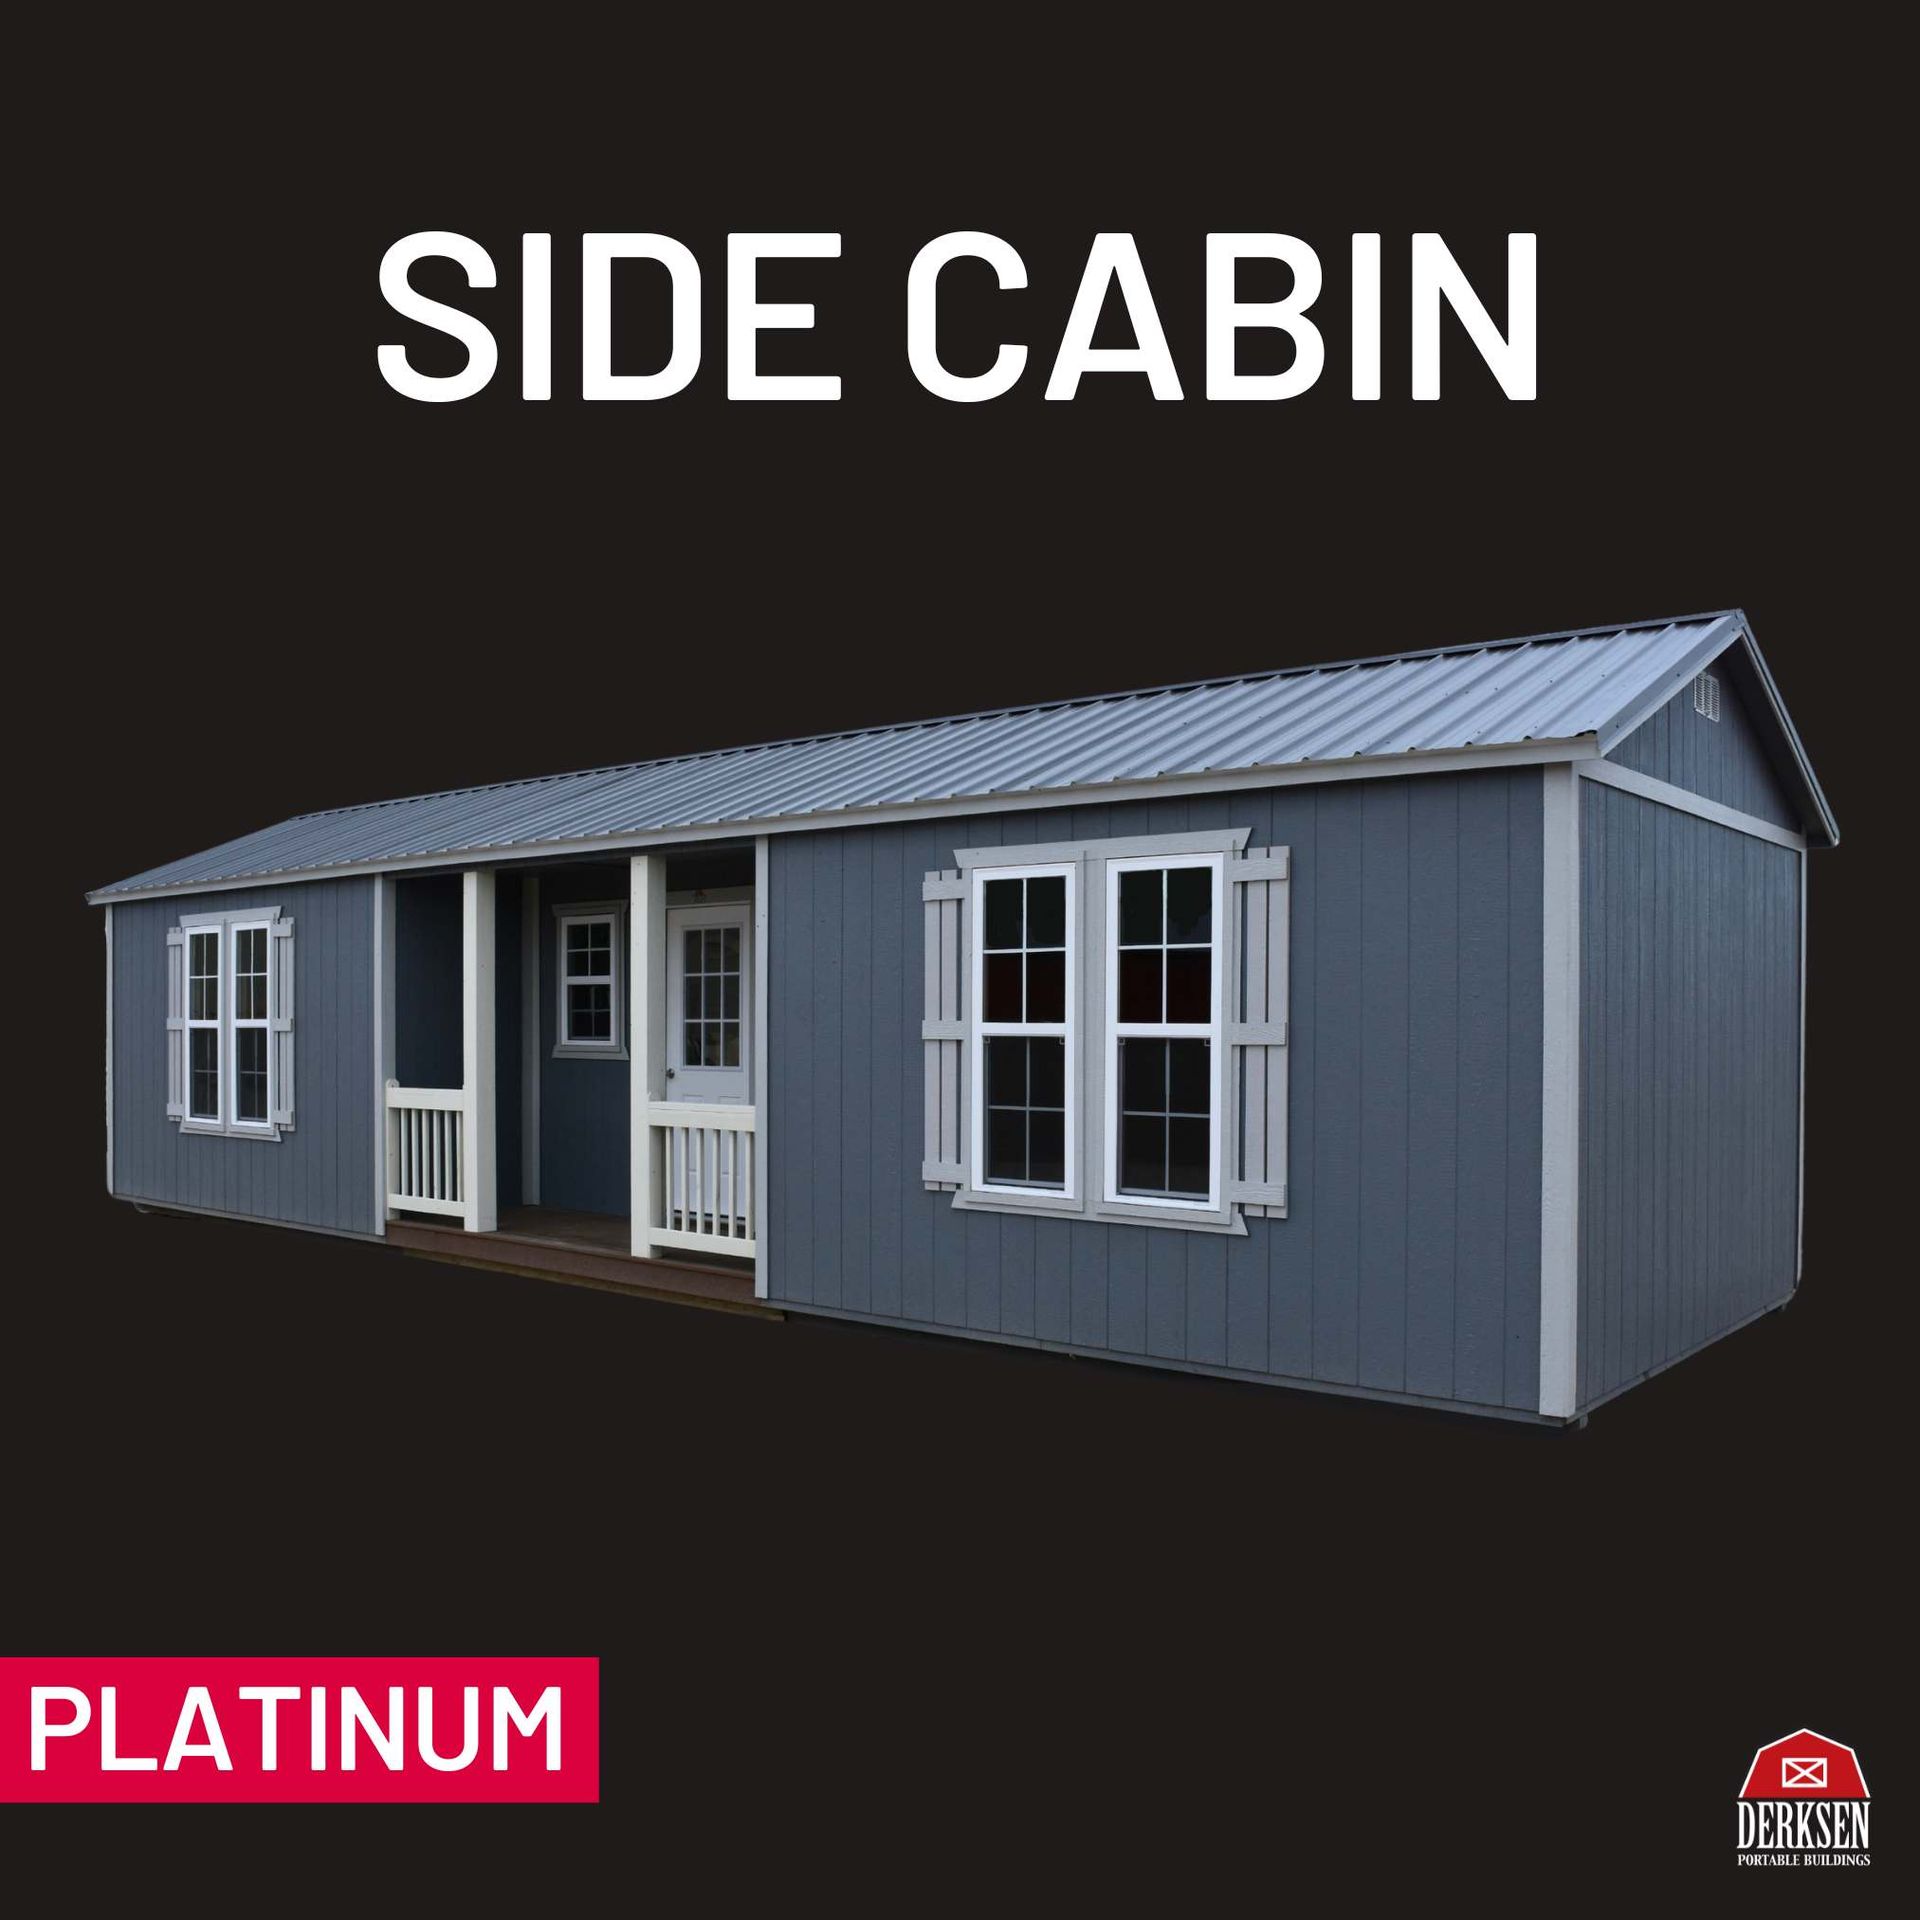 a picture of a side cabin with platinum written on it